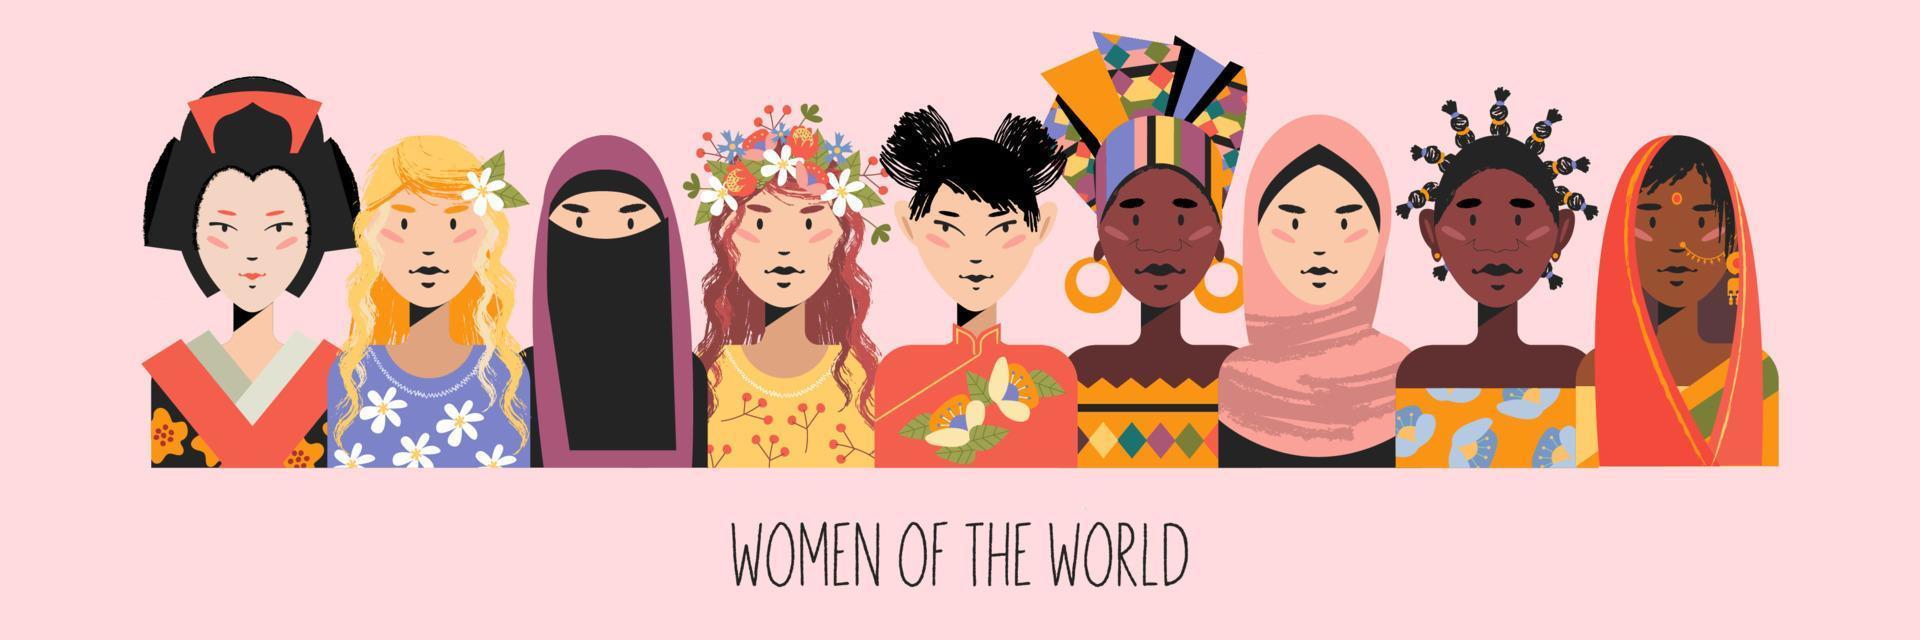 Women from all over the world. Women in traditional outfits. Vector illustration.